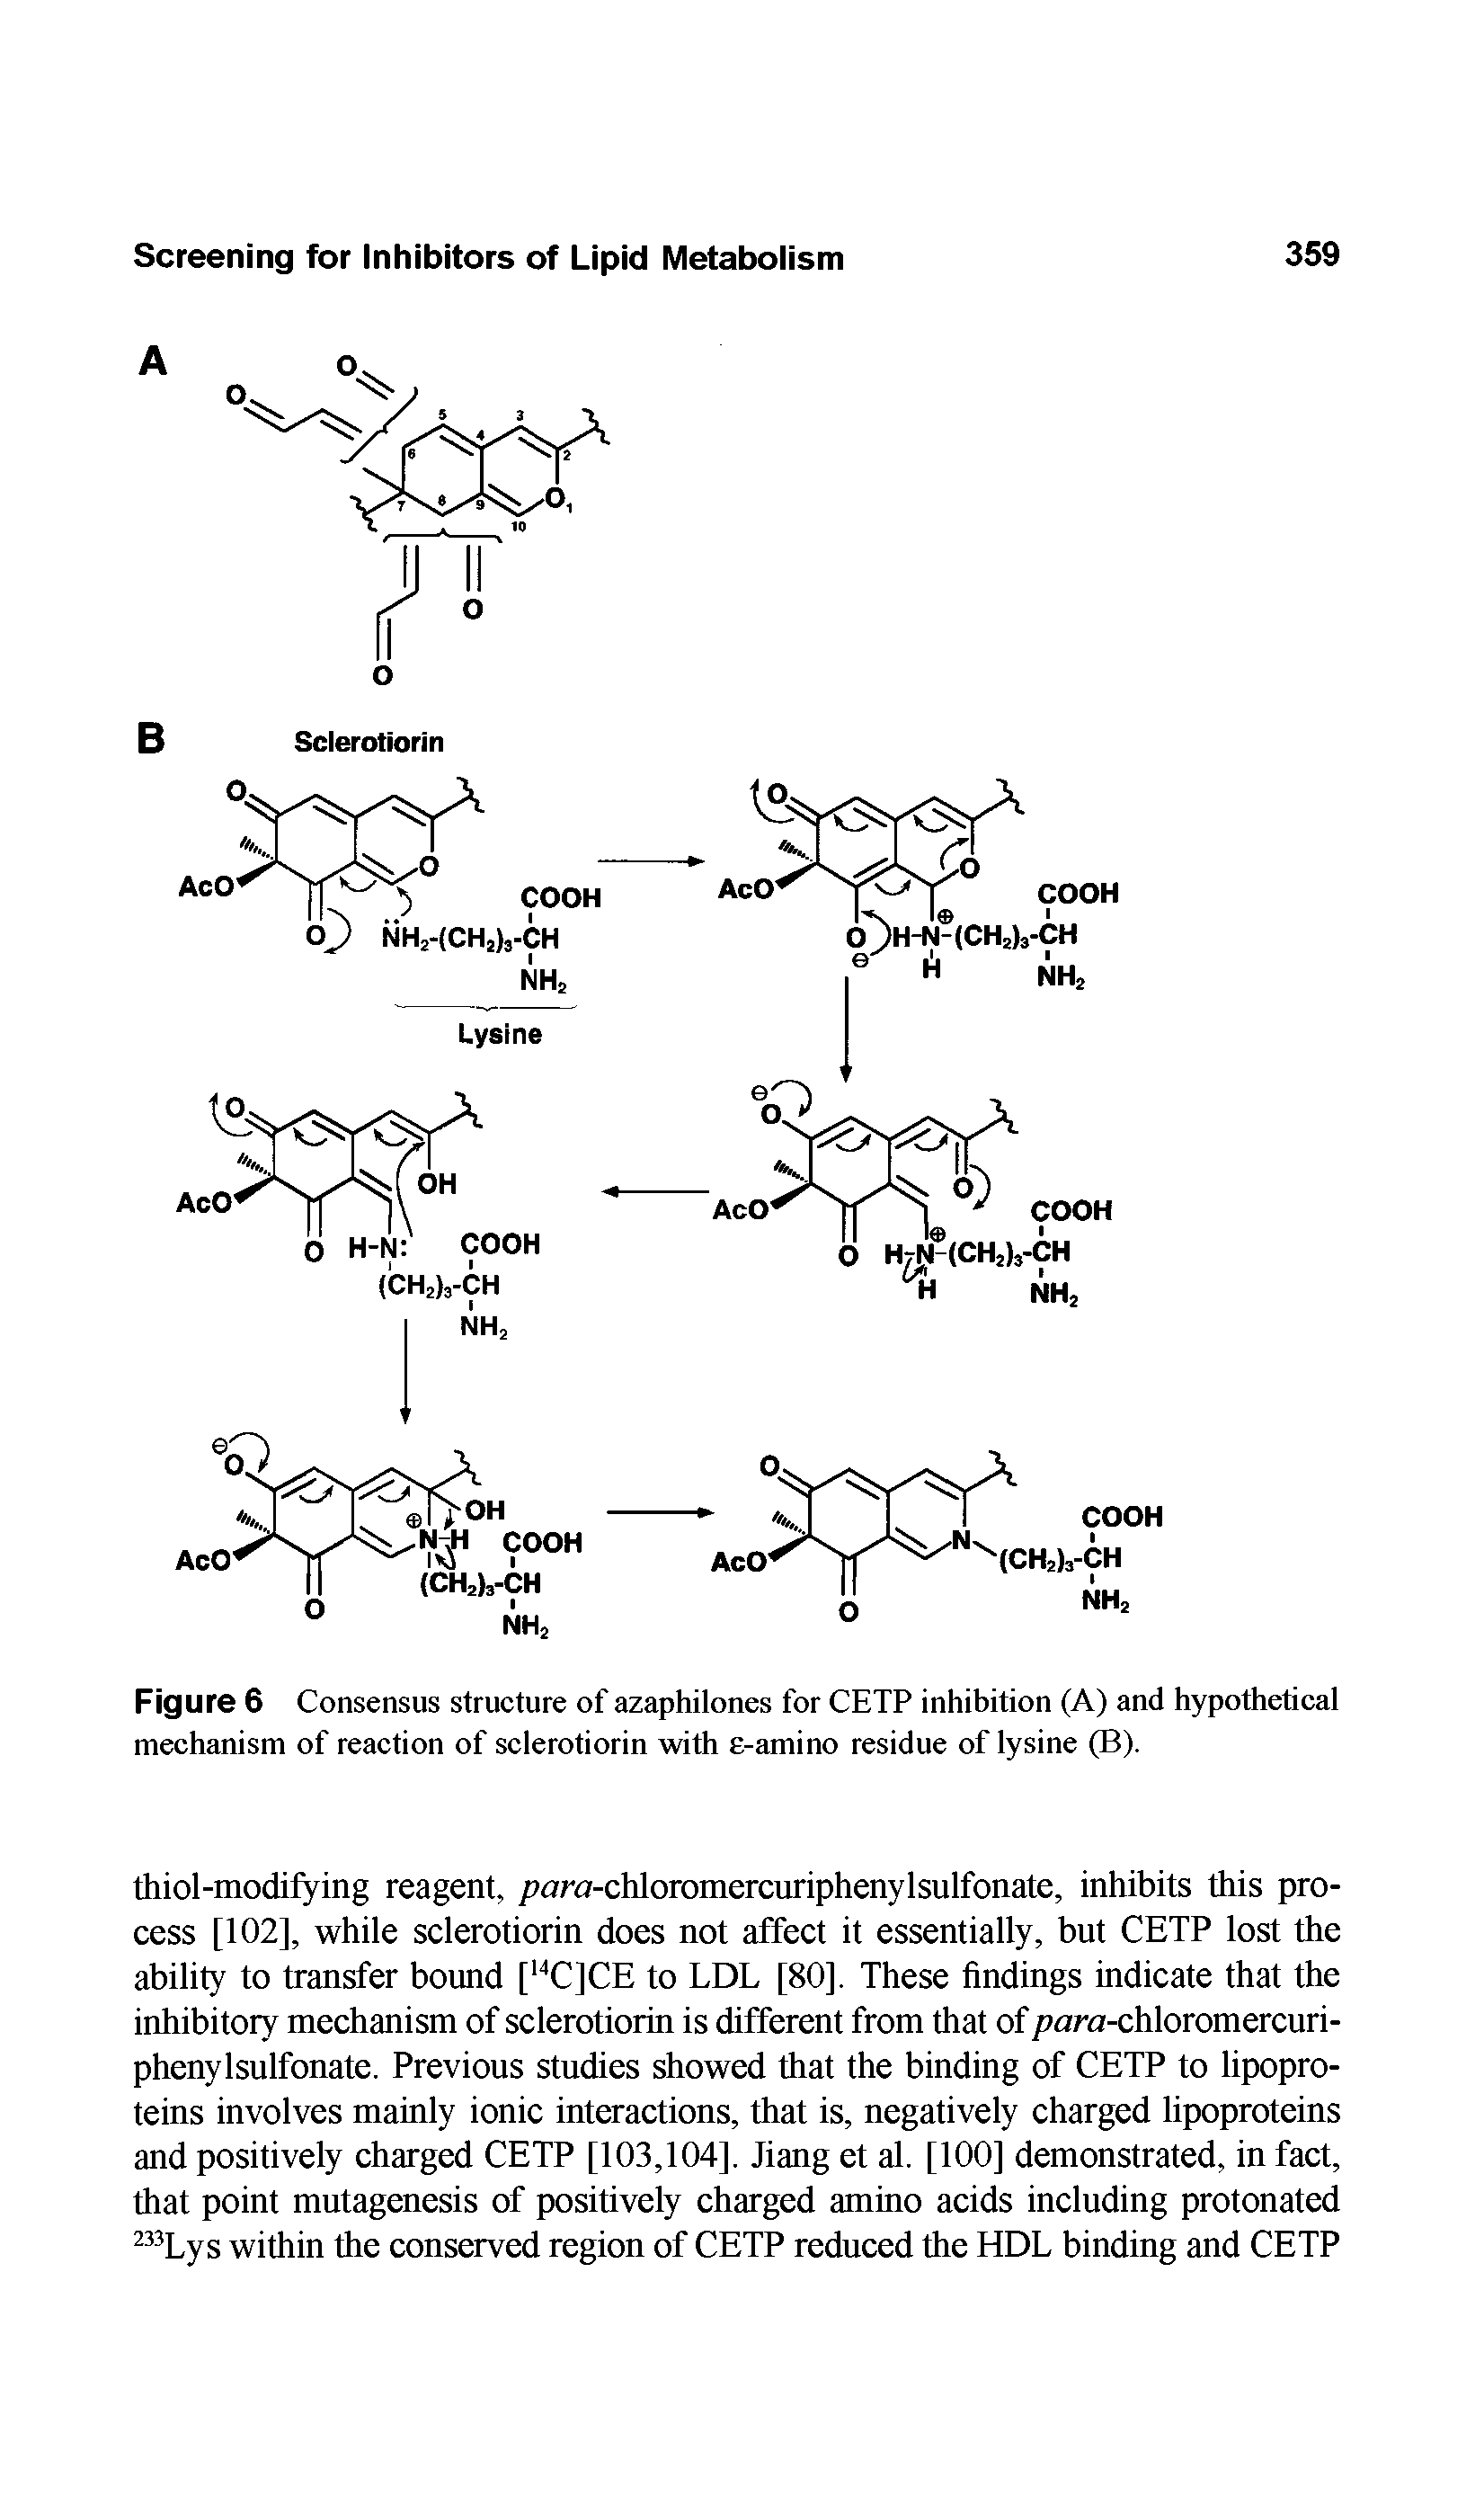 Figure 6 Consensus structure of azaphilones for CETP inhibition (A) and hypothetical mechanism of reaction of sclerotiorin with e-amino residue of lysine (B).